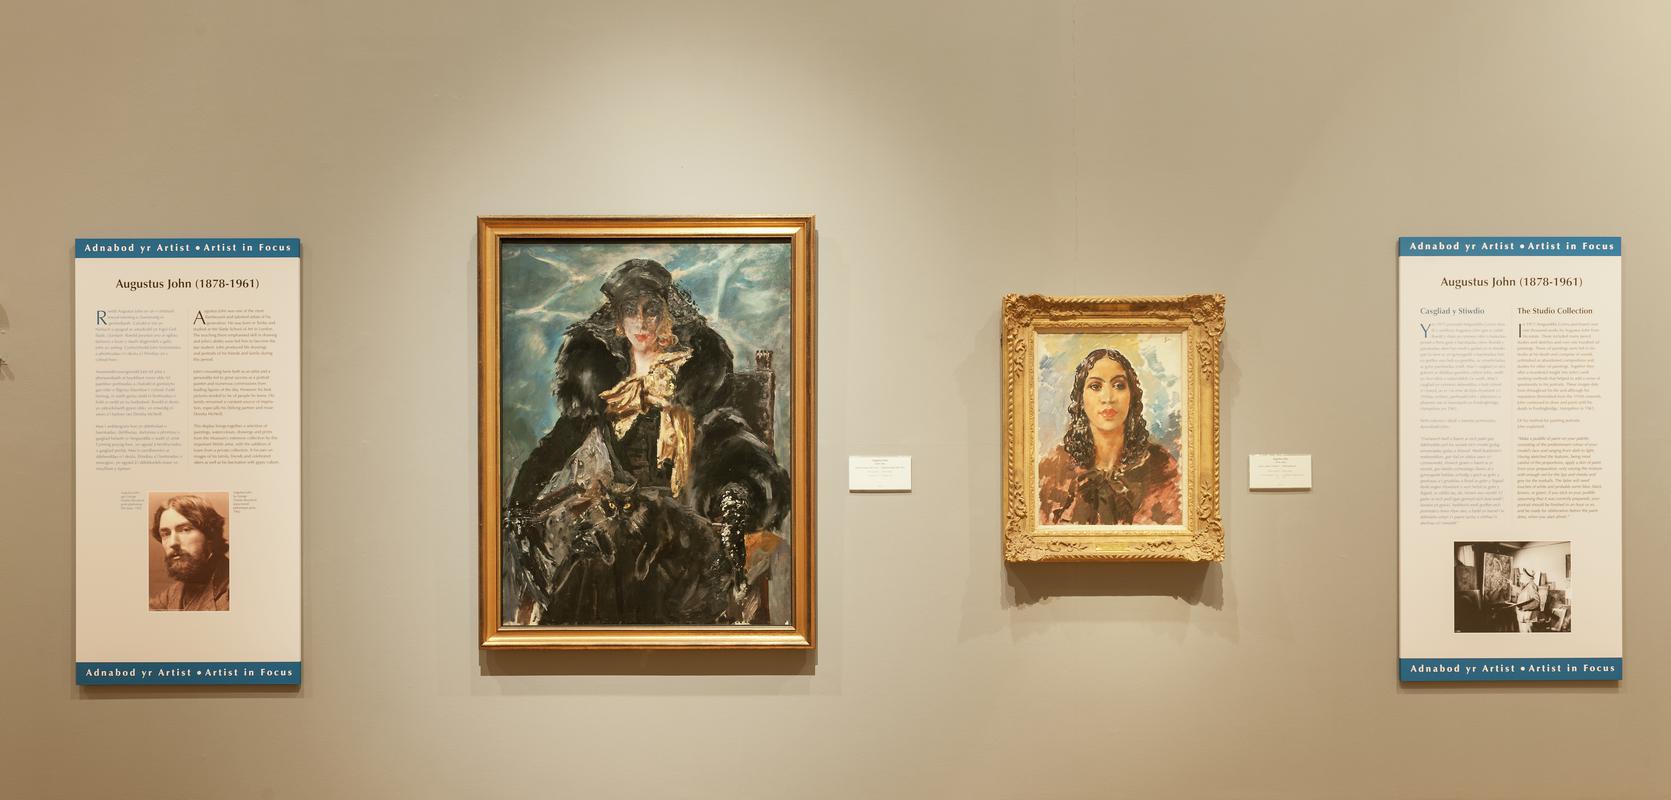 A West Indian Girl and Marchesa Casati (1881-1957) from Augustus John in Focus exhibition